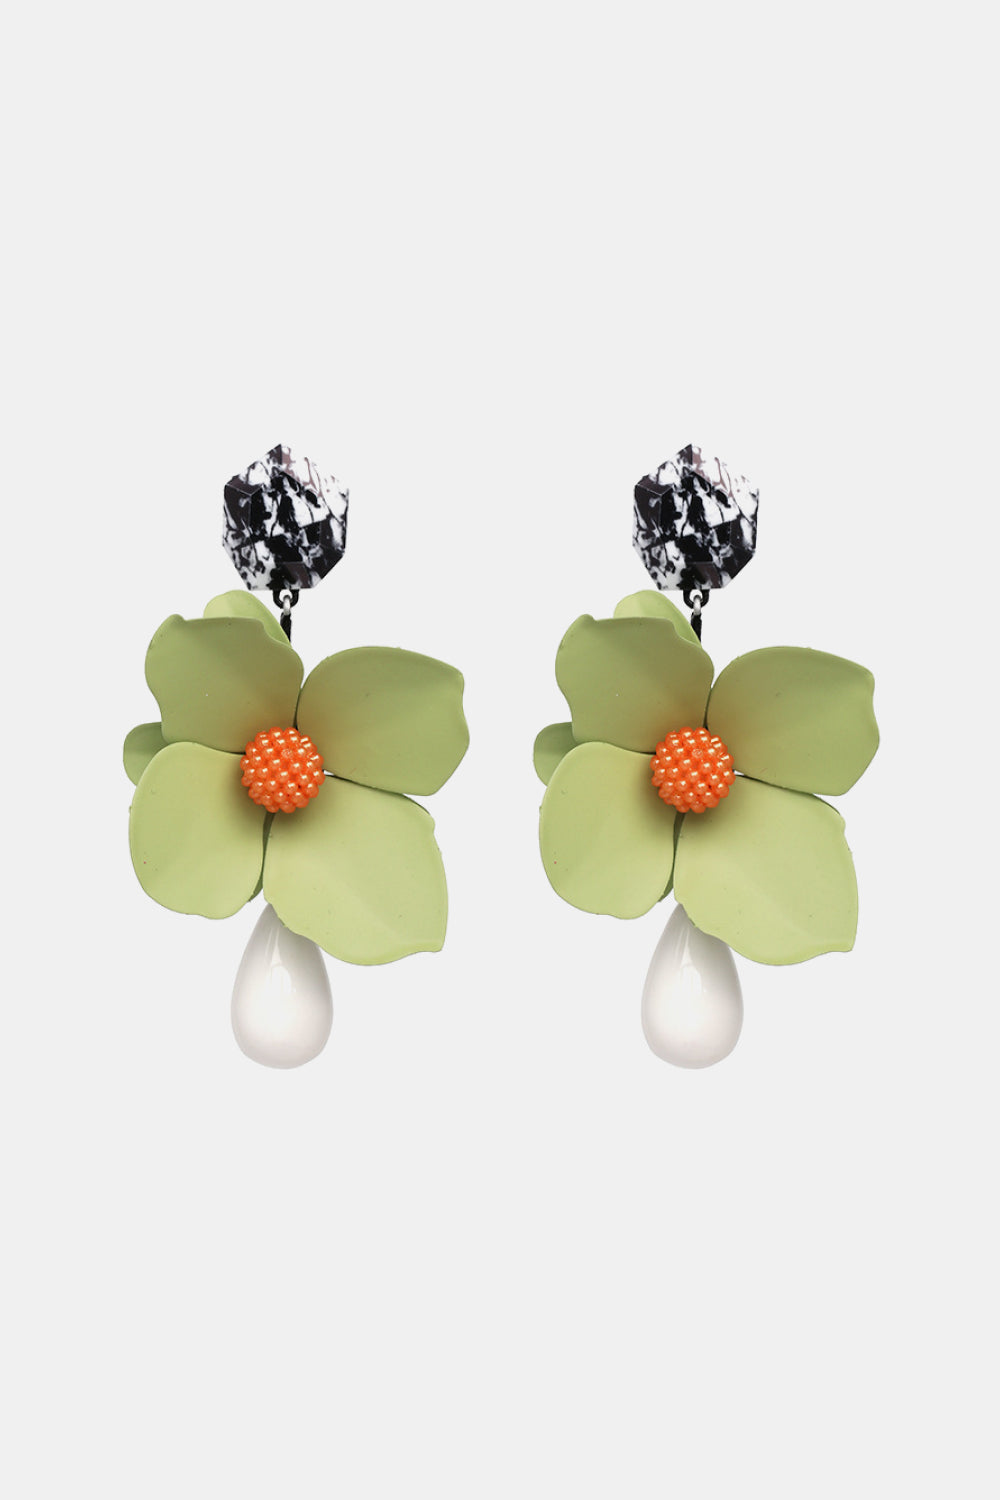 Bloosm Flower and Teardrop Resin Dangle Earrings | Jewelry | dangle earrings, earrings, J.J.S.P, Jewelry, jewelry sets, Ship From Overseas, Shipping Delay 09/29/2023 - 10/04/2023 | Trendsi